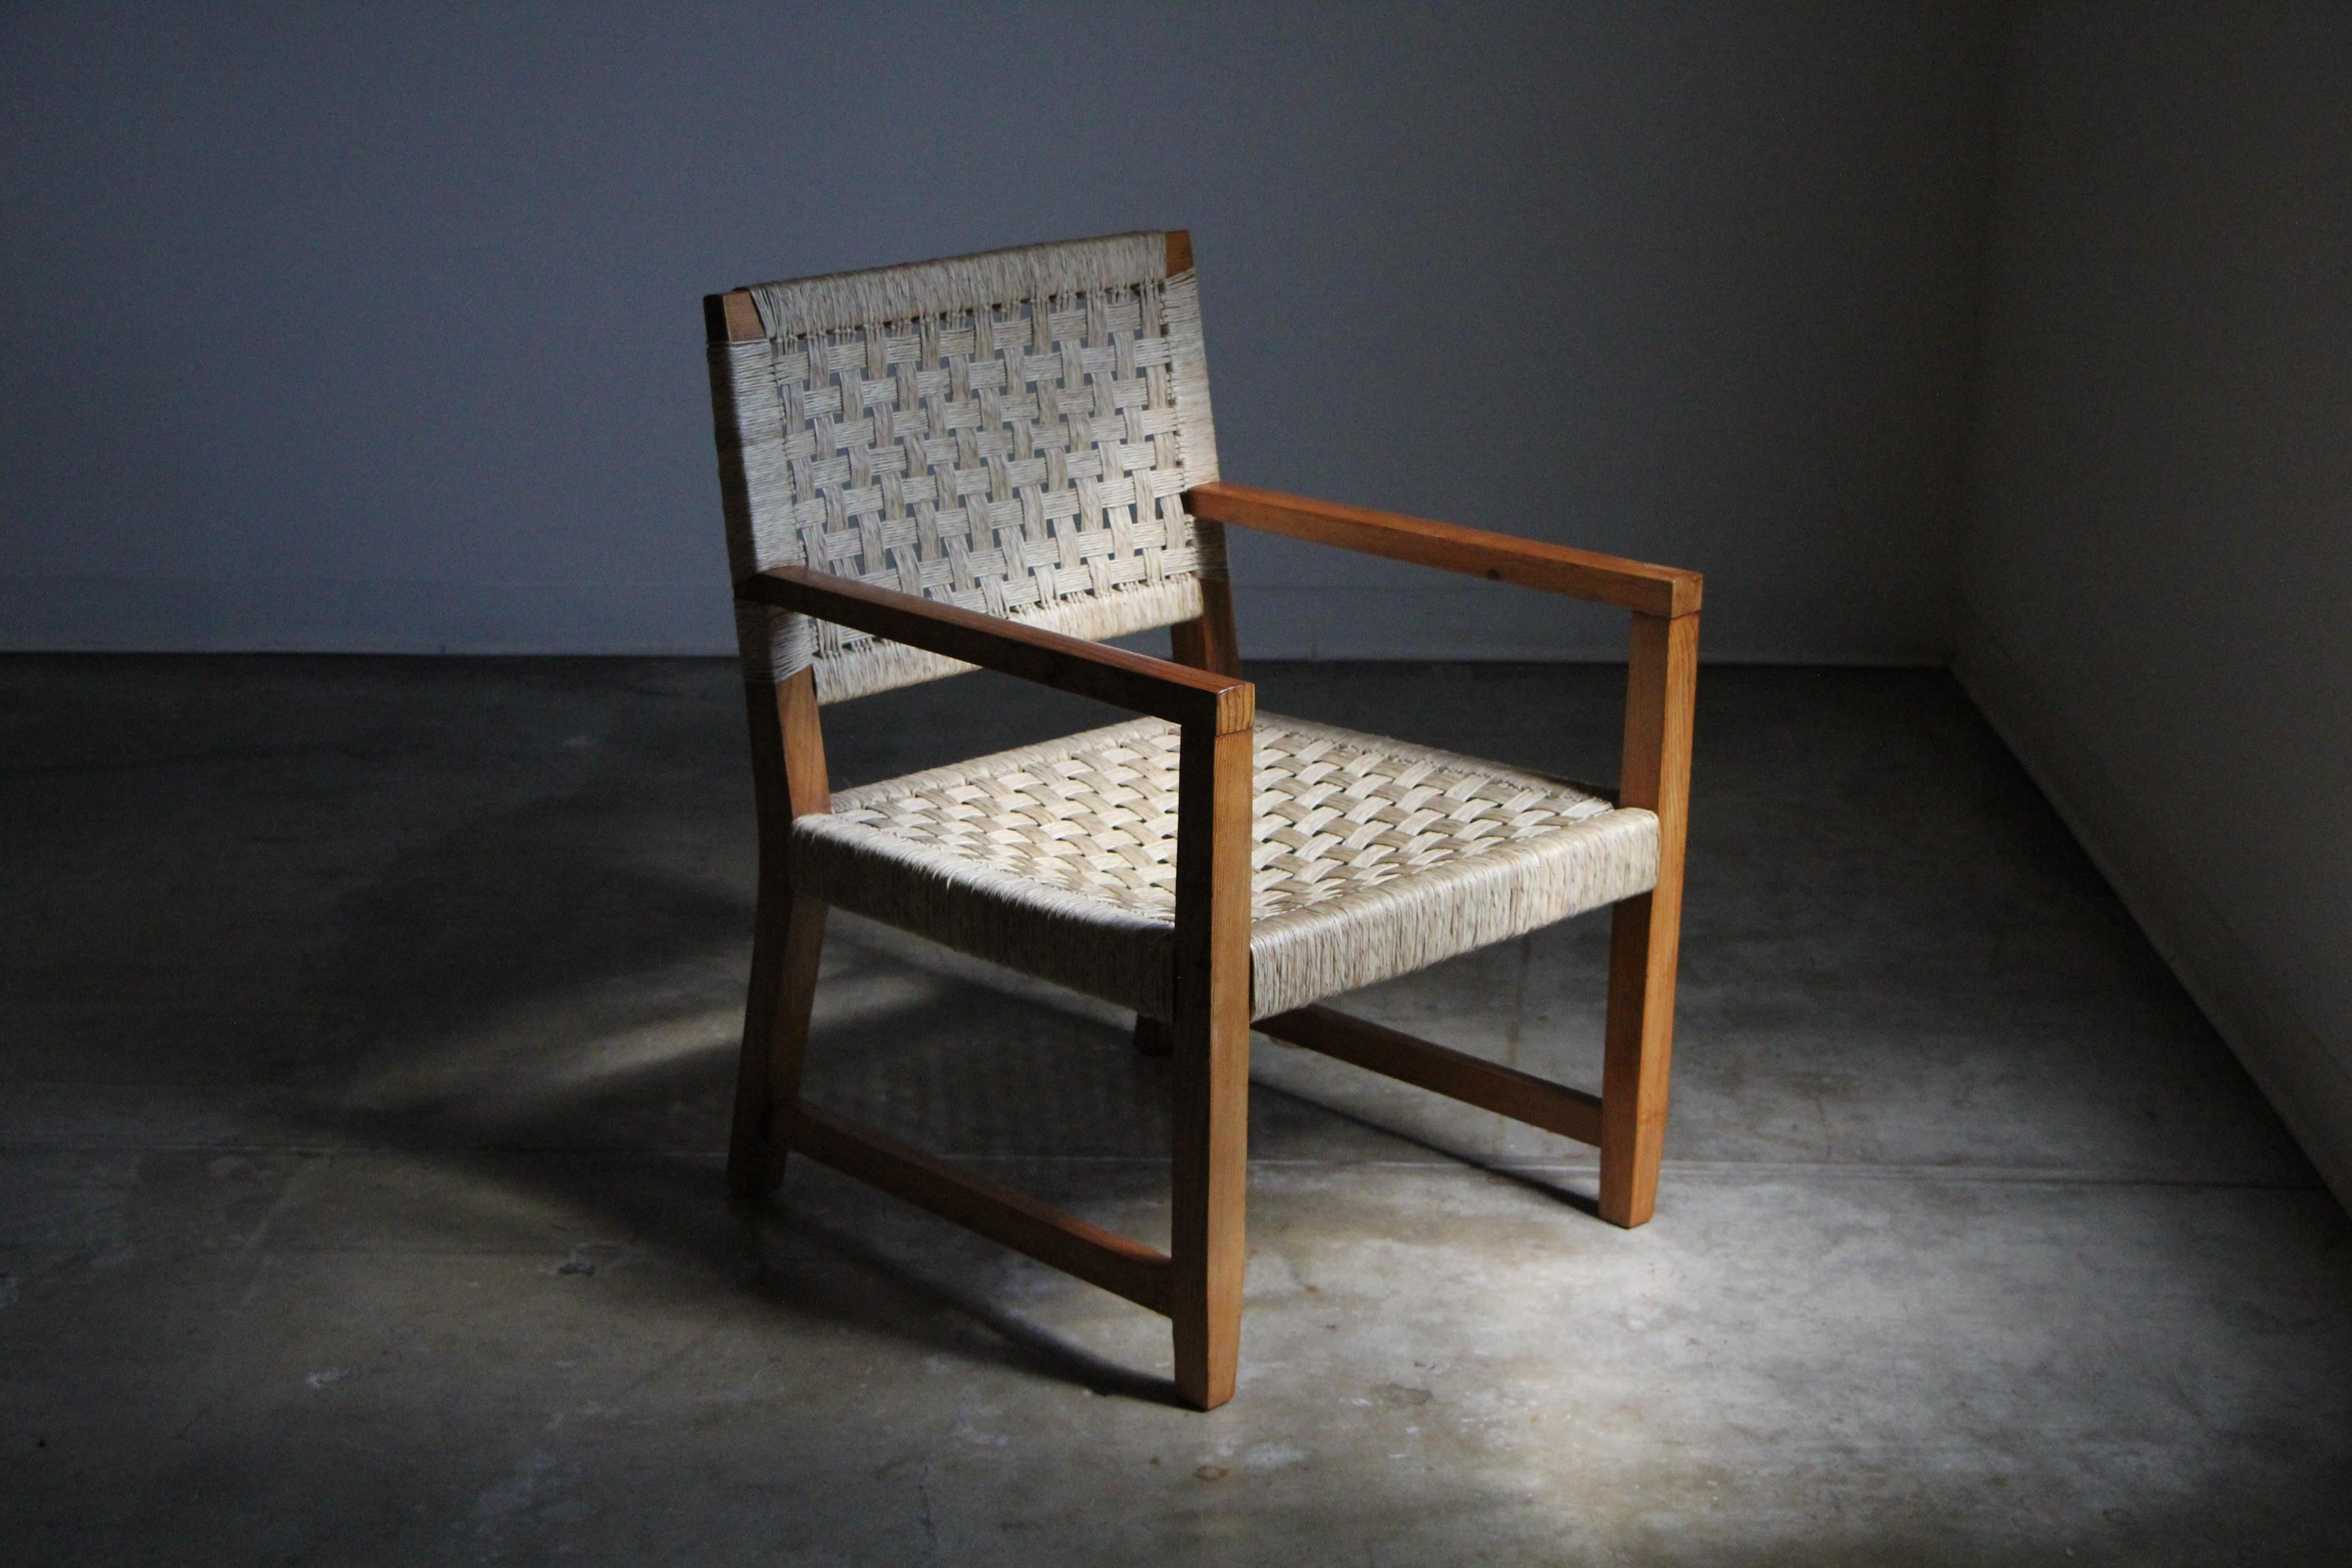 This absolutely stunning and super uncommon lounge chair was designed by Bauhaus trained designer Michael van Beuren for Muebles, Mexico in the 1940s. The chair is constructed of solid pine, with the seat and back beautifully wrapped in woven palm.